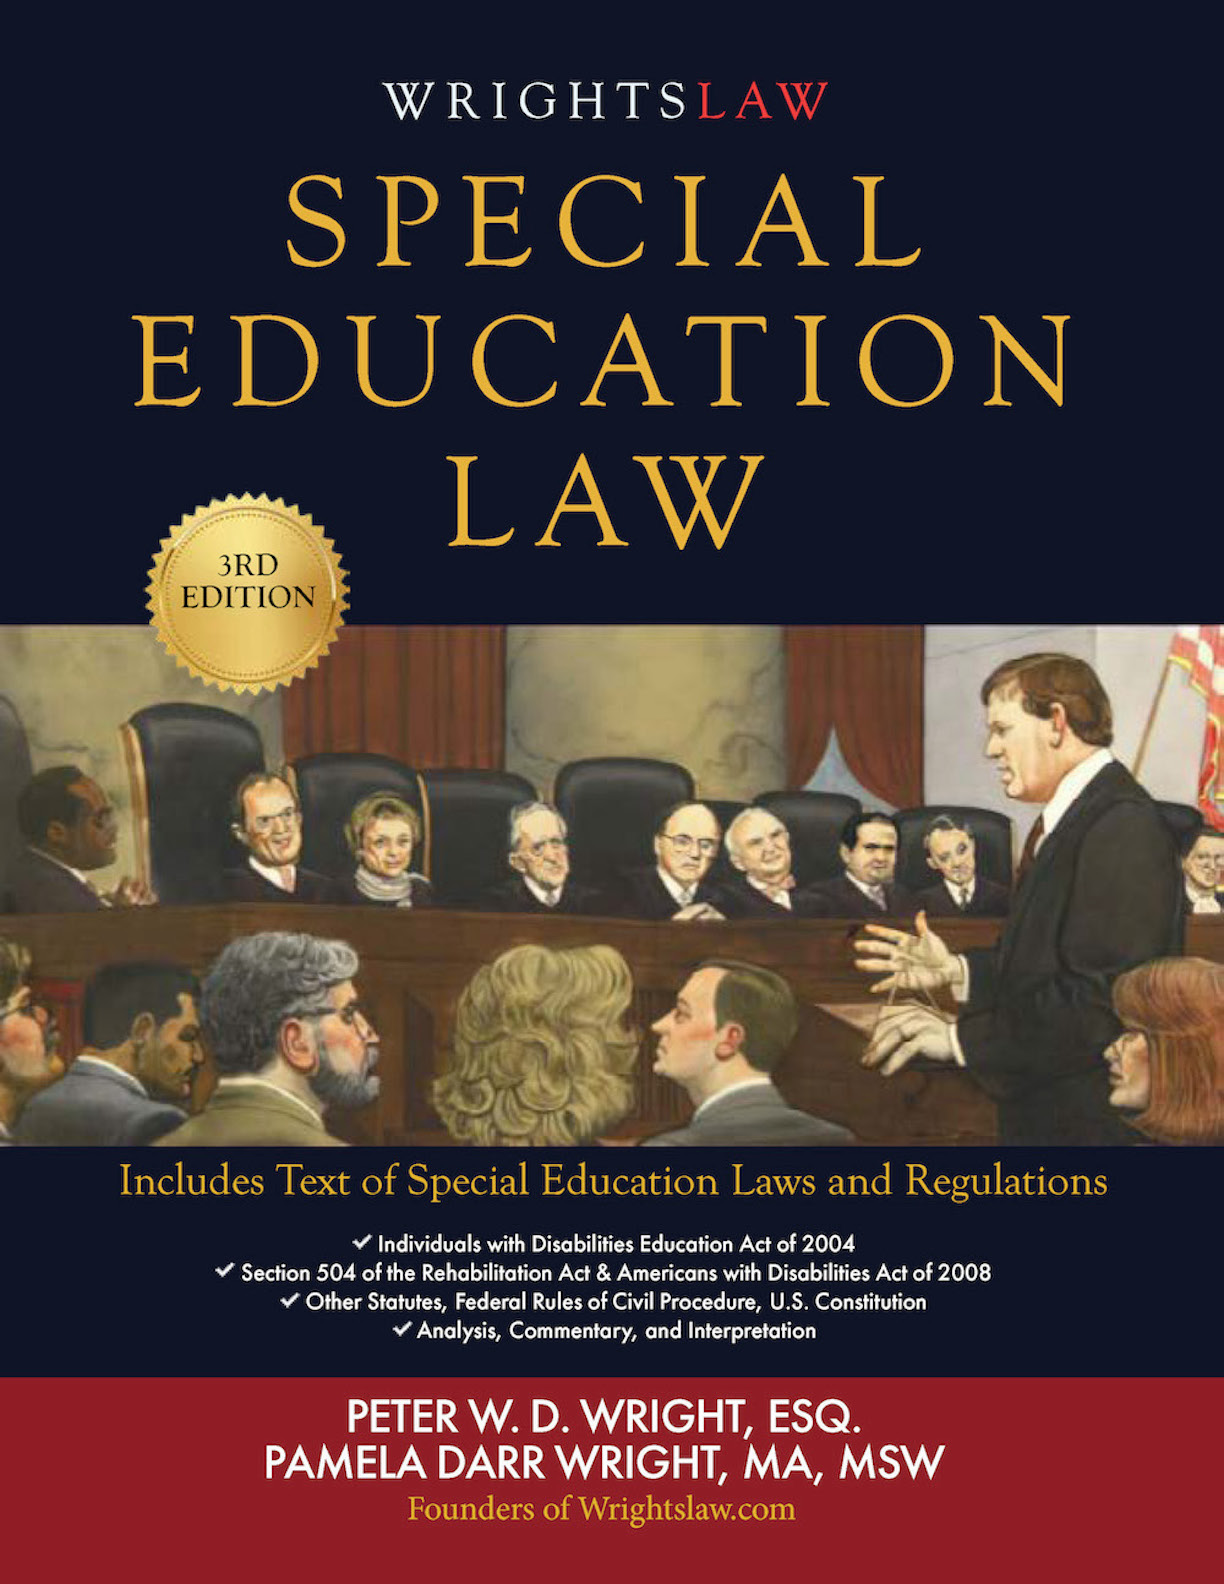 Wrightslaw: Special Education Law, 3rd Edition, by Peter Wright and Pamela Wright